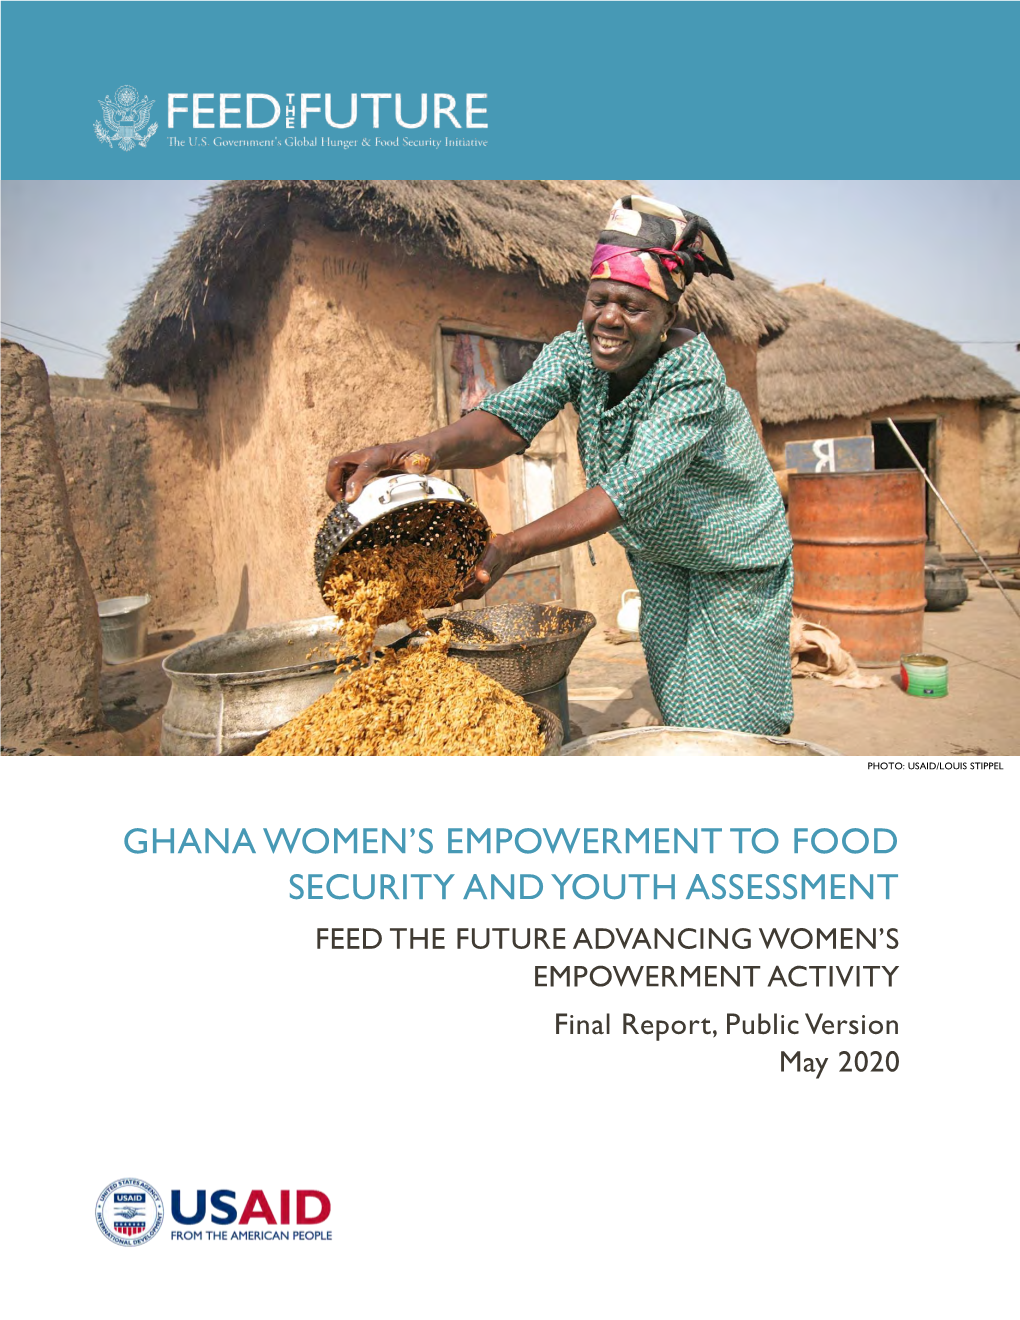 Ghana Women's Empowerment to Food Security and Youth Assessment